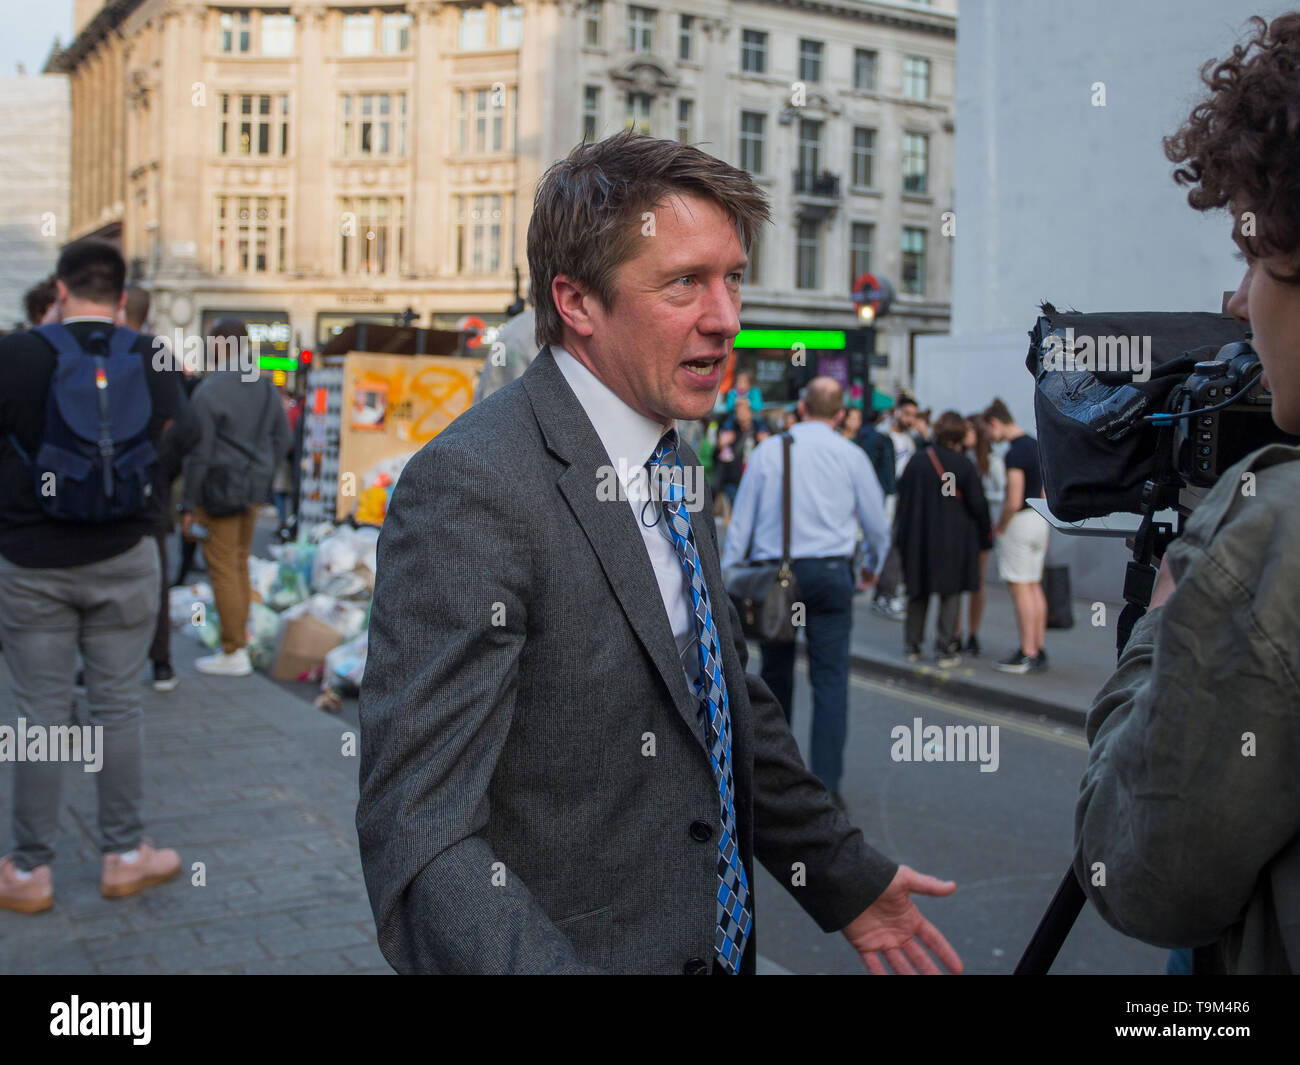 British actor and comedian Tom Walker performs as Jonathan Pie at climate  protest group Extinction Rebellion's blockade of London's Oxford Circus  Featuring: Tom Walker (Jonathan Pie} Where: London, United Kingdom When: 18